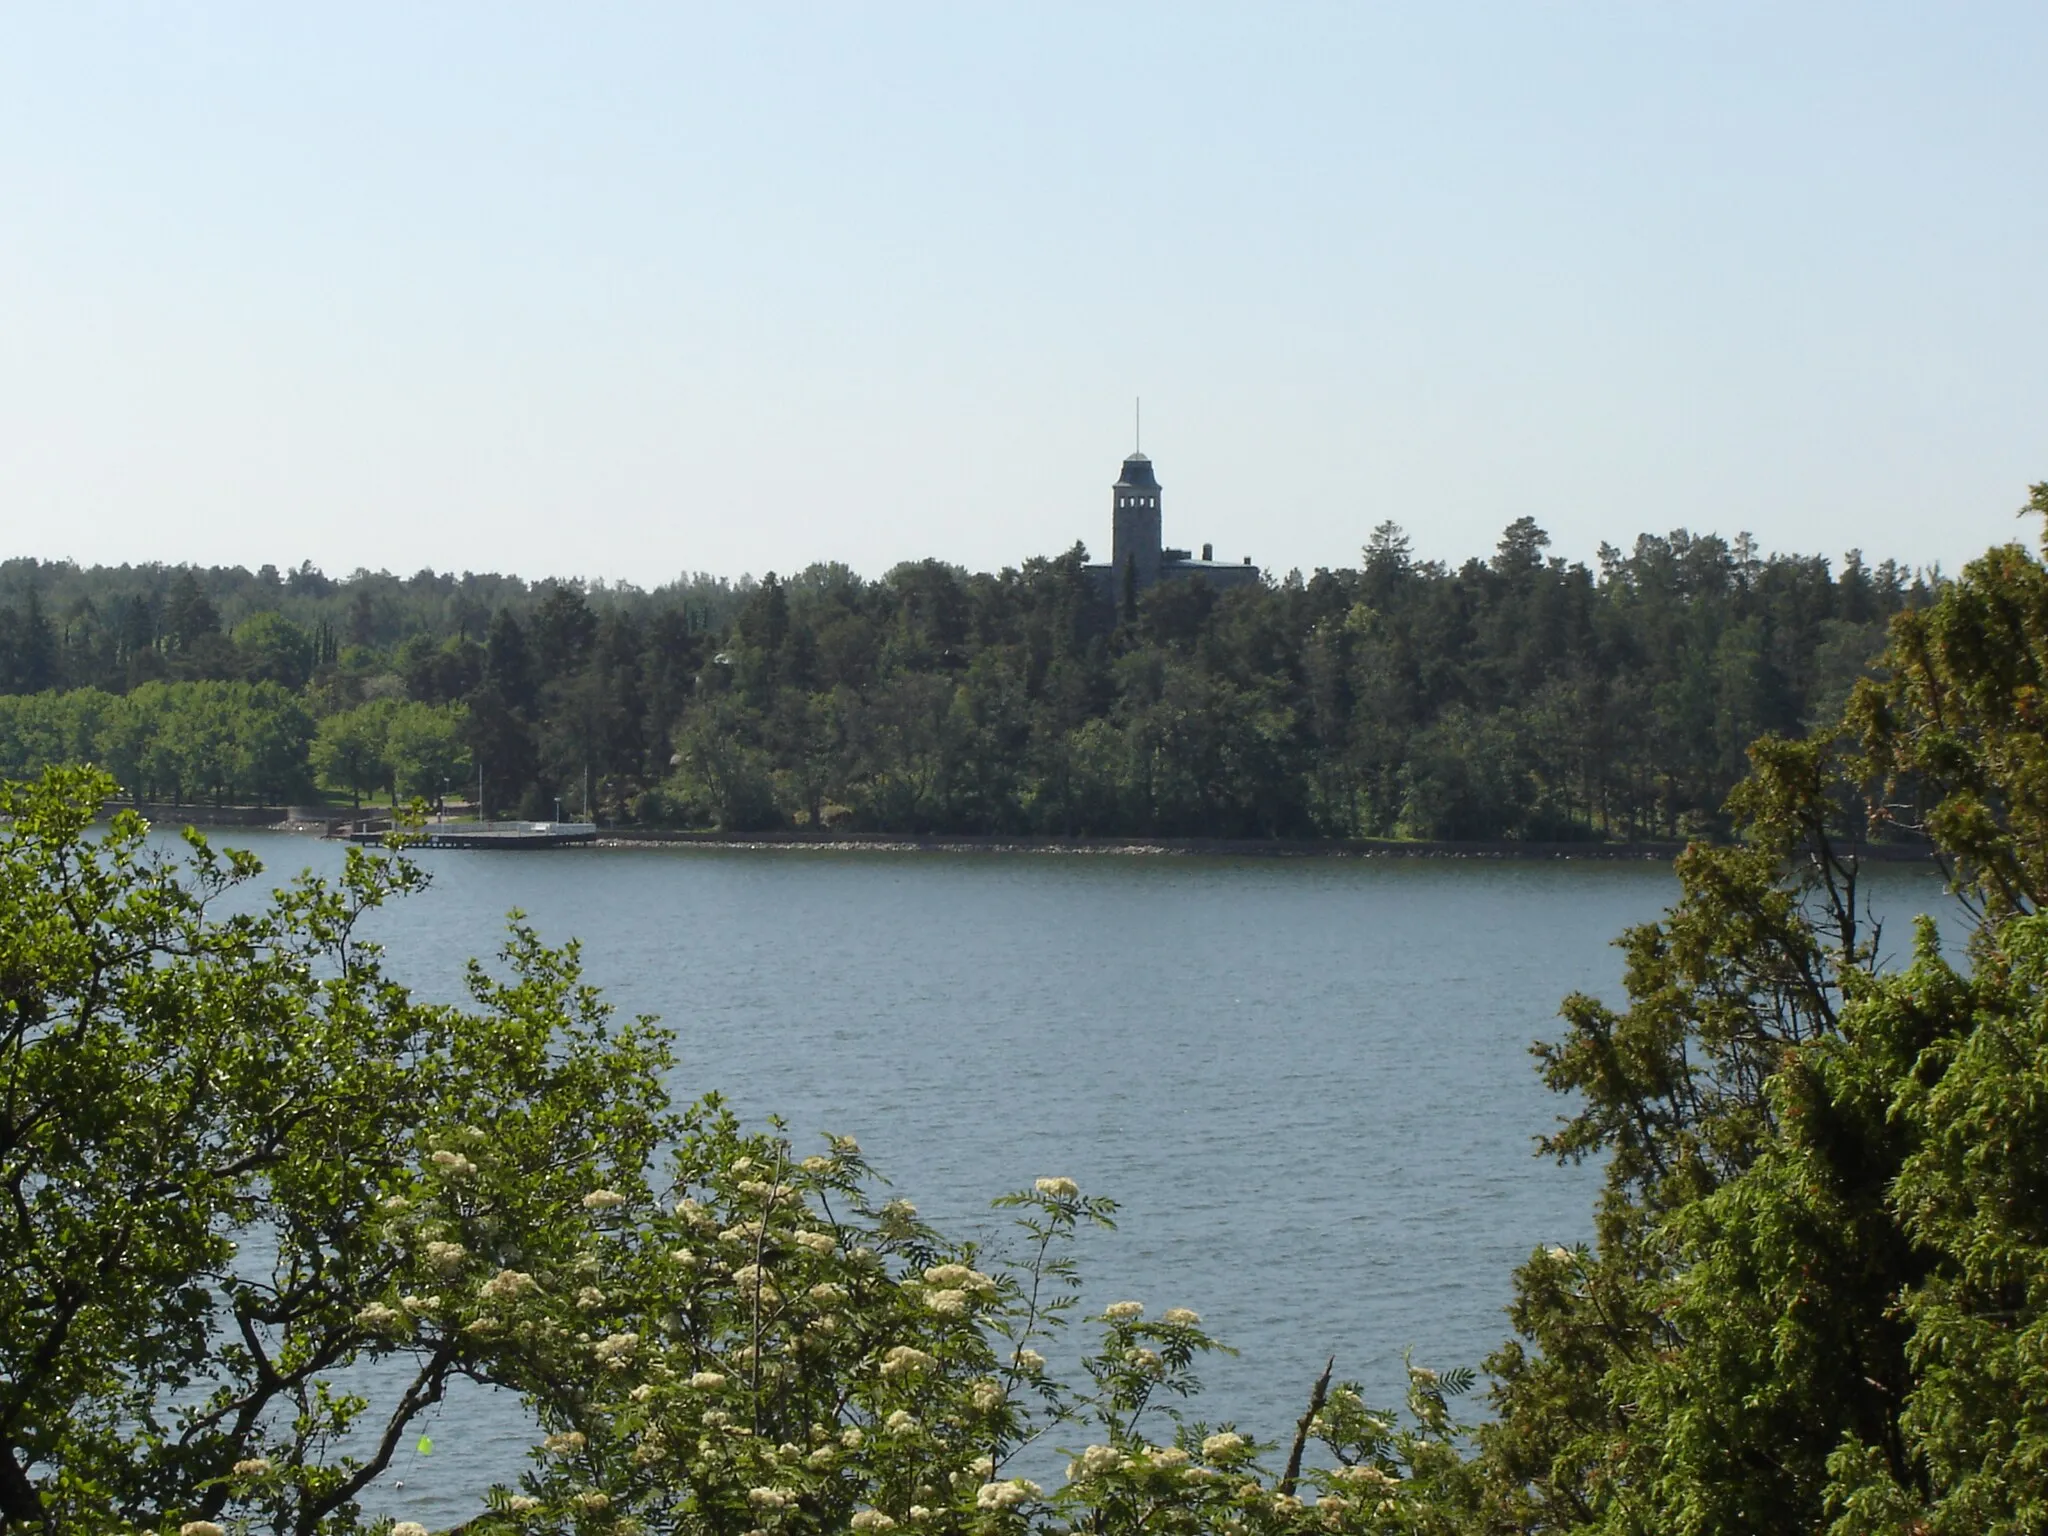 Photo showing: Kultaranta Castle, the summer residence of the President of Finland, in Naantali, Finland